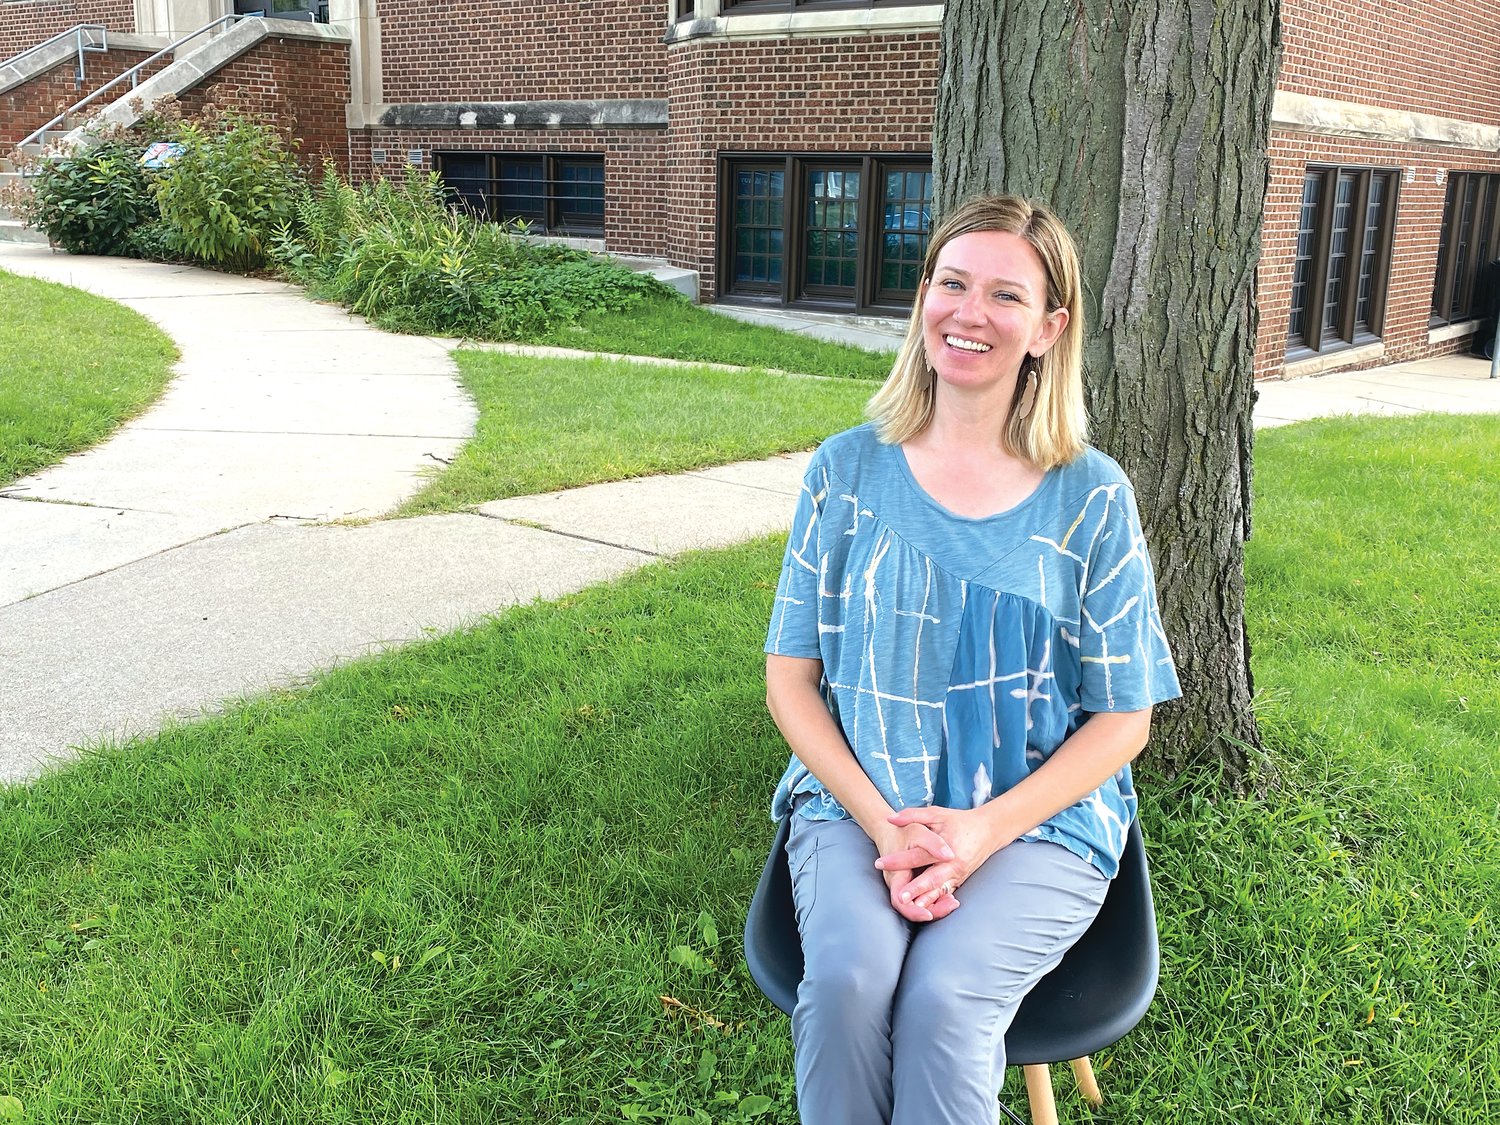 Sarah O’Brien just ended her first year as Hamline Midway Coalition Executive Director.